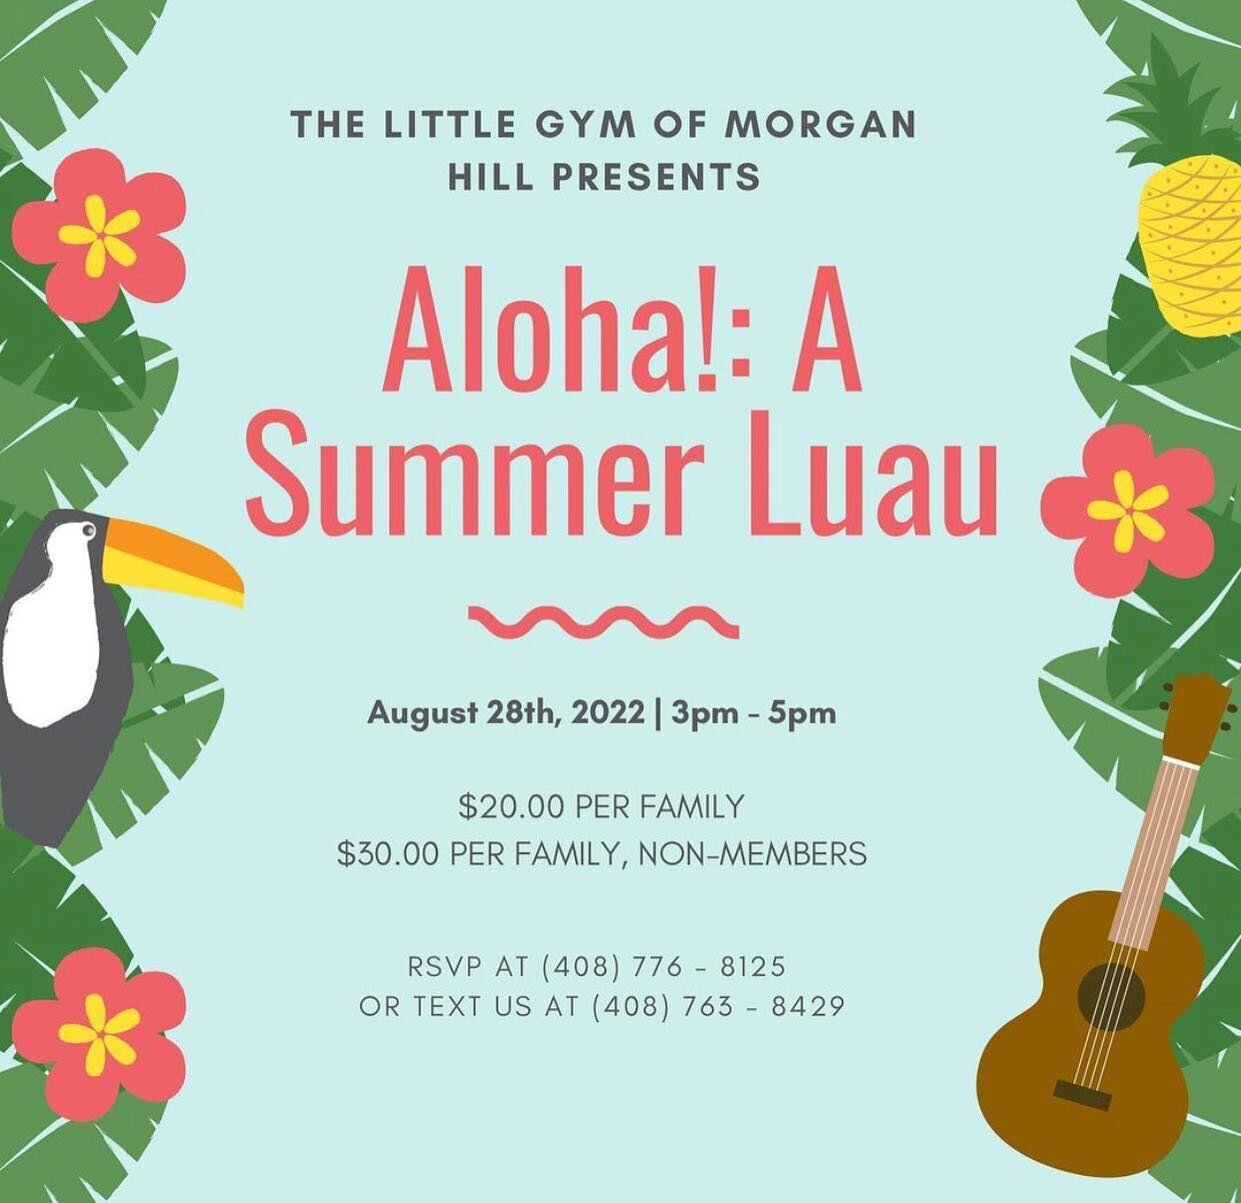 Kickoff the school year Aloha style with The Little Gym of Morgan Hill🌺🌊. Playtime+crafts+shaved ice=tons of family fun 🙌 #buylocalmorganhill #95037 #choosemorganhill #morganhillca #morganhillcalifornia #morganhillliving #morganhilllife